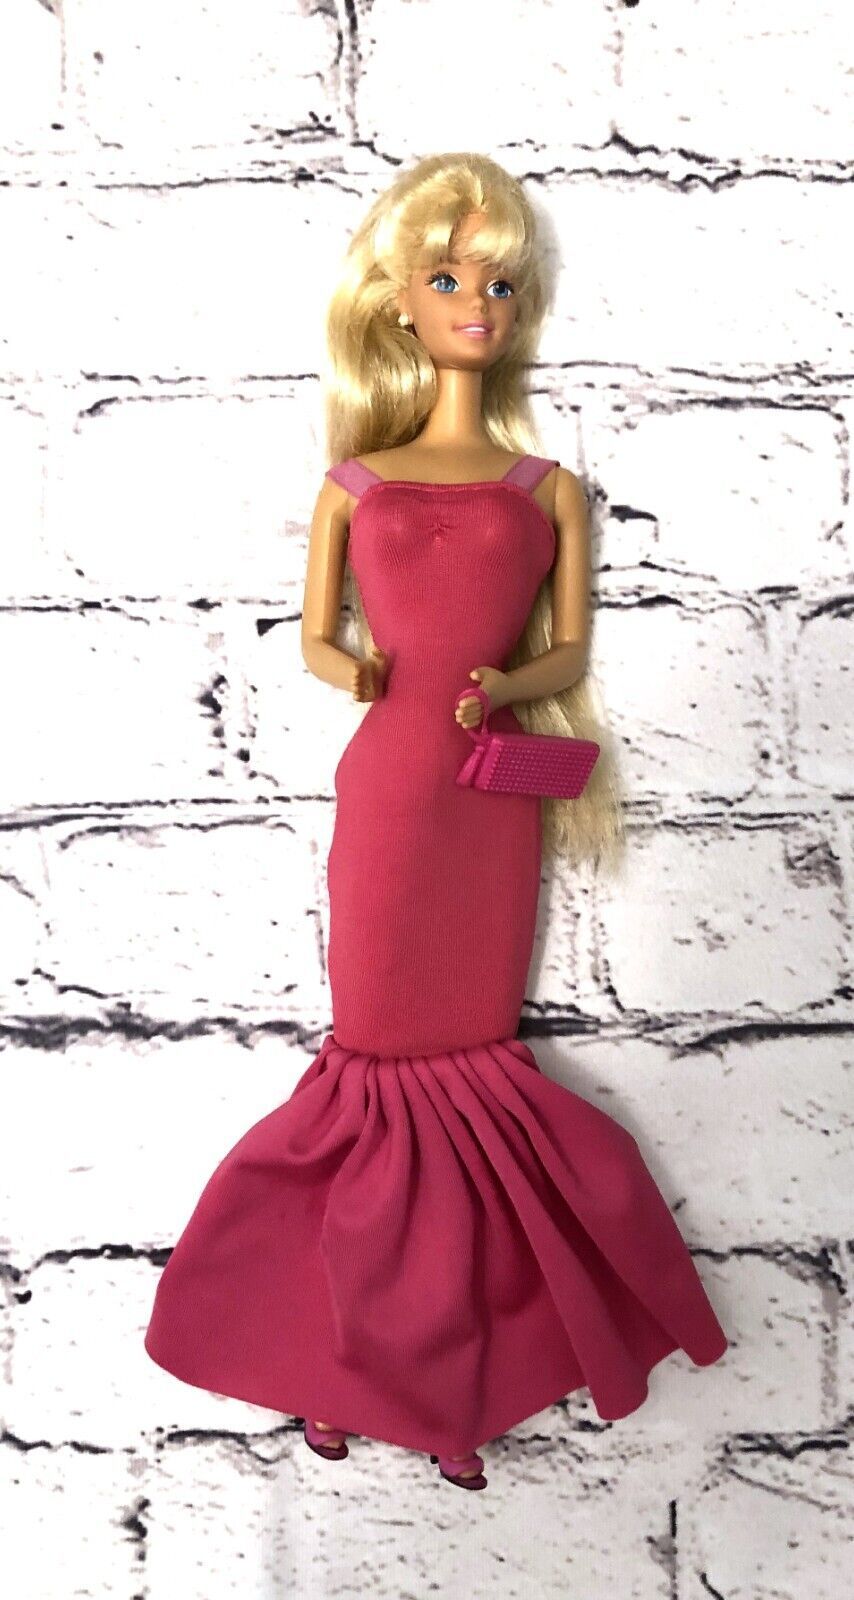 Primary image for Mattel Barbie Doll 1990's or 1980 in Pink Evening Gown Dress Re-dressed